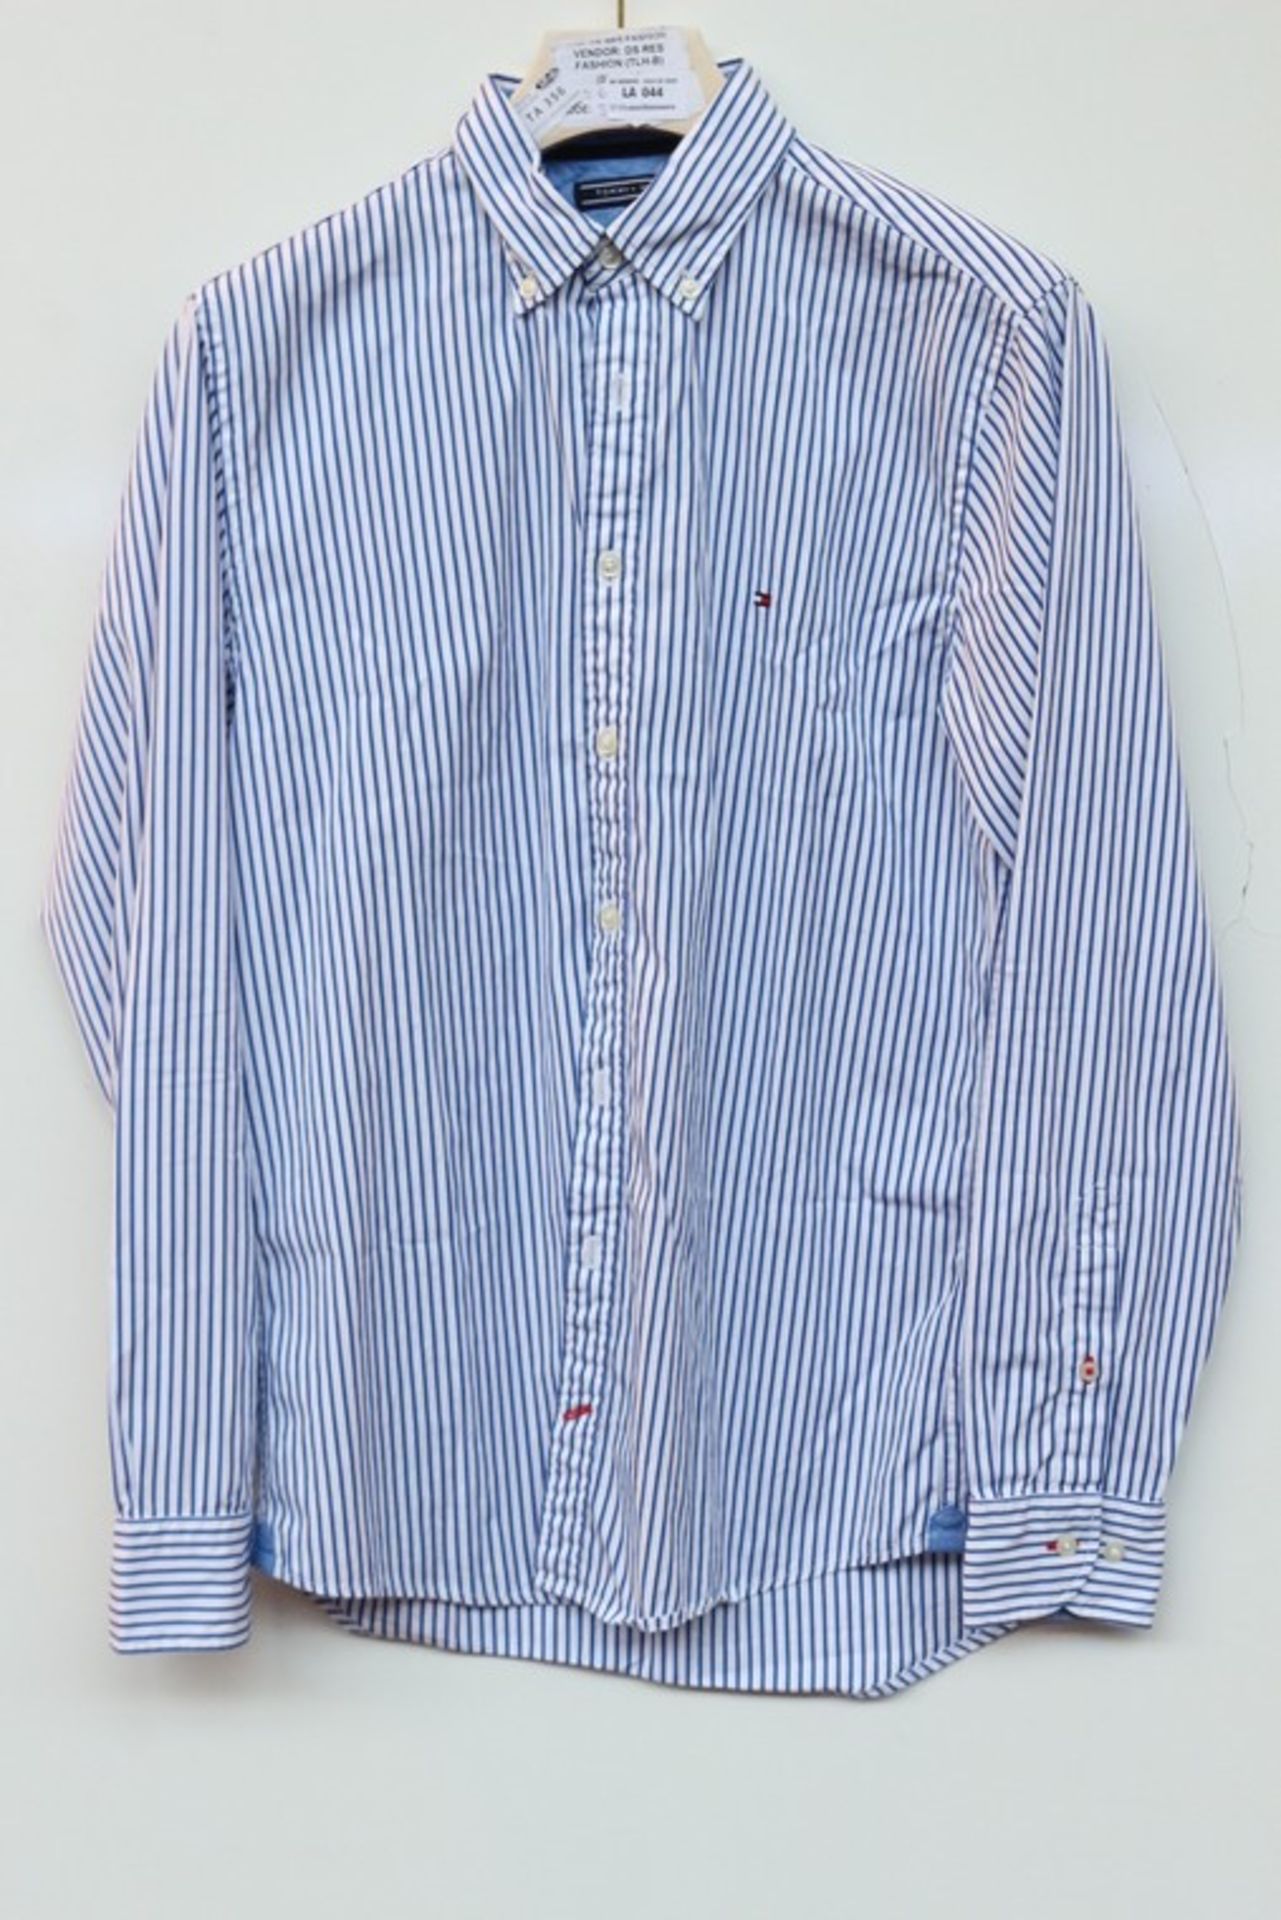 1 x SIZE S TOMMY HILFIGER BLUE AND WHITE GENTS DESIGNER SHIRT RRP £75 (17.6.16) *PLEASE NOTE THAT